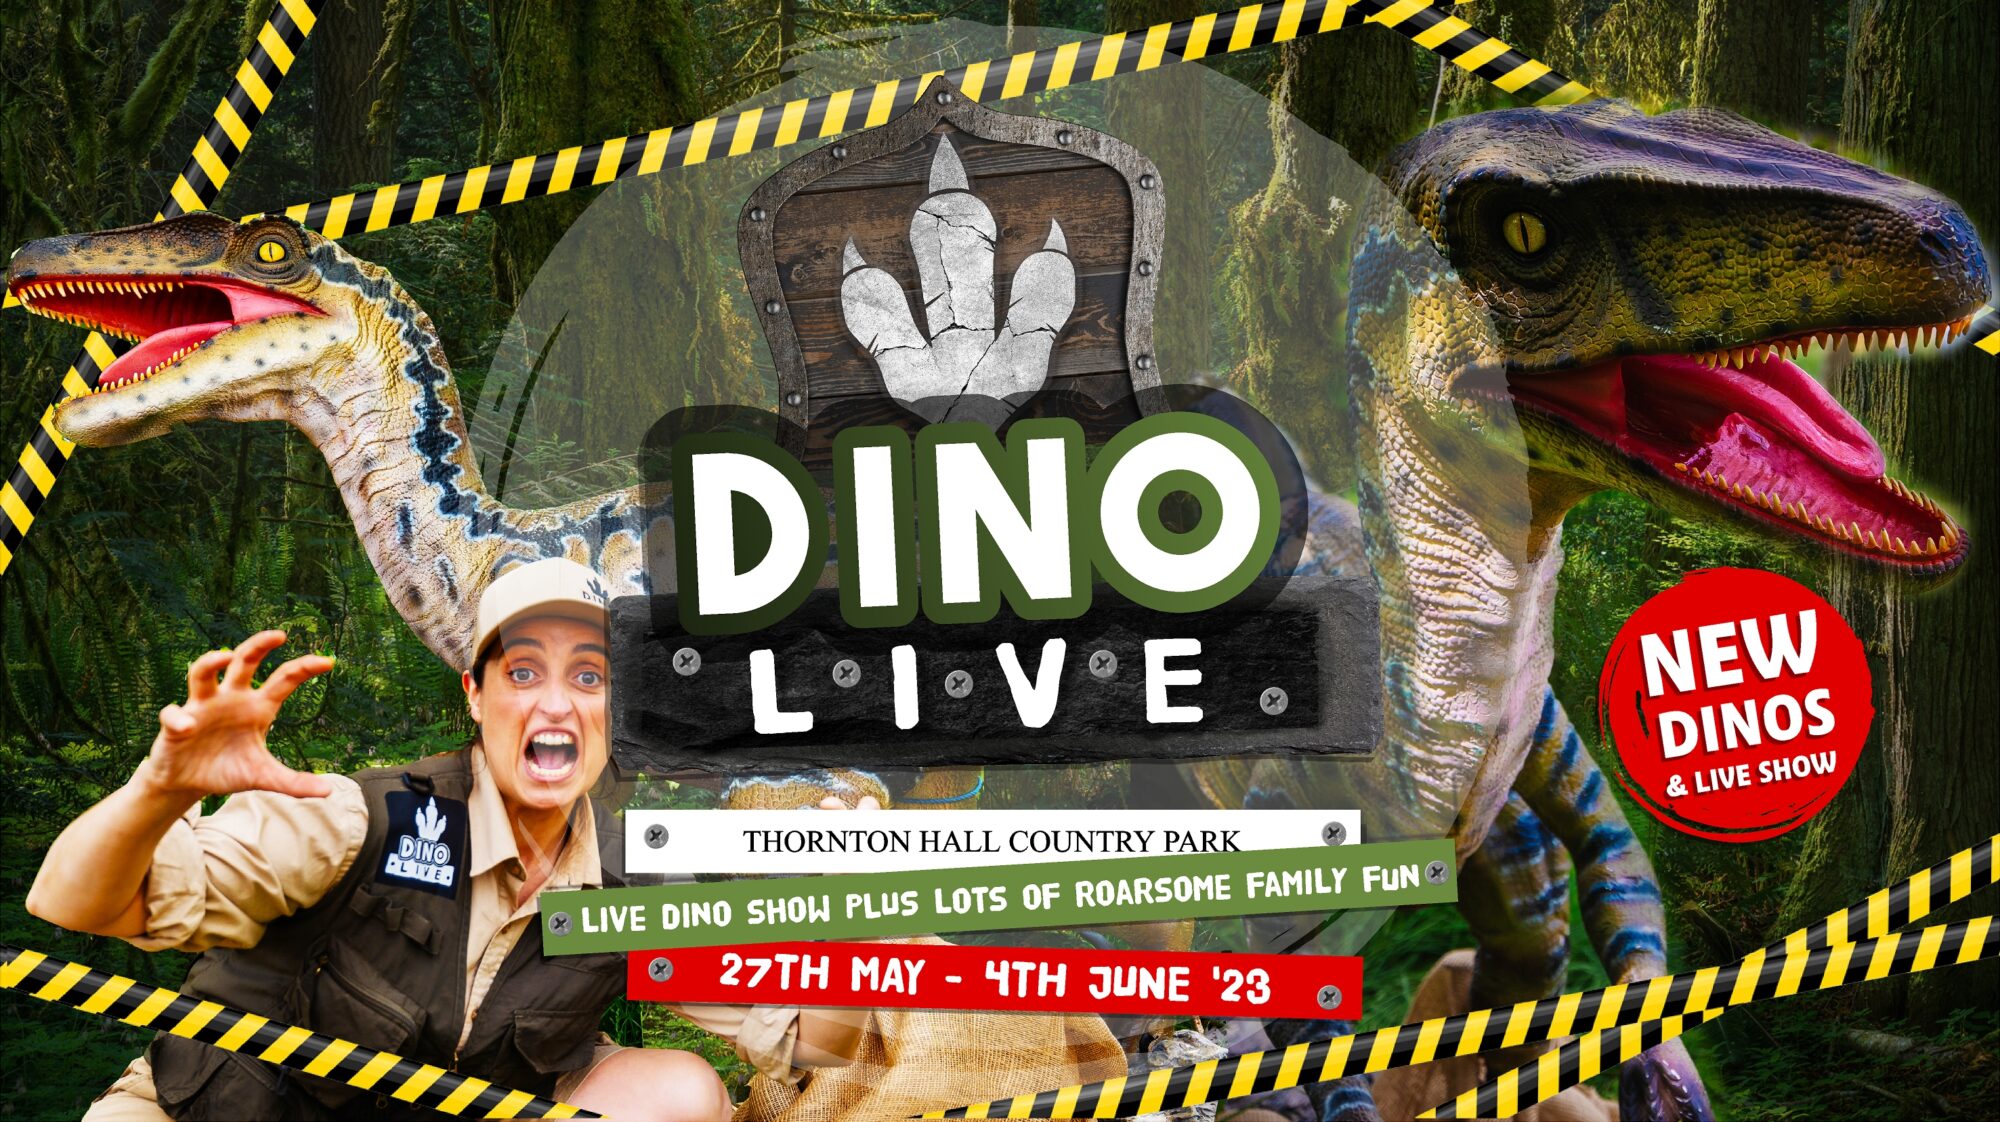 Image name Dino Live Rect Web tickets the 16 image from the post Dino Live in Yorkshire.com.